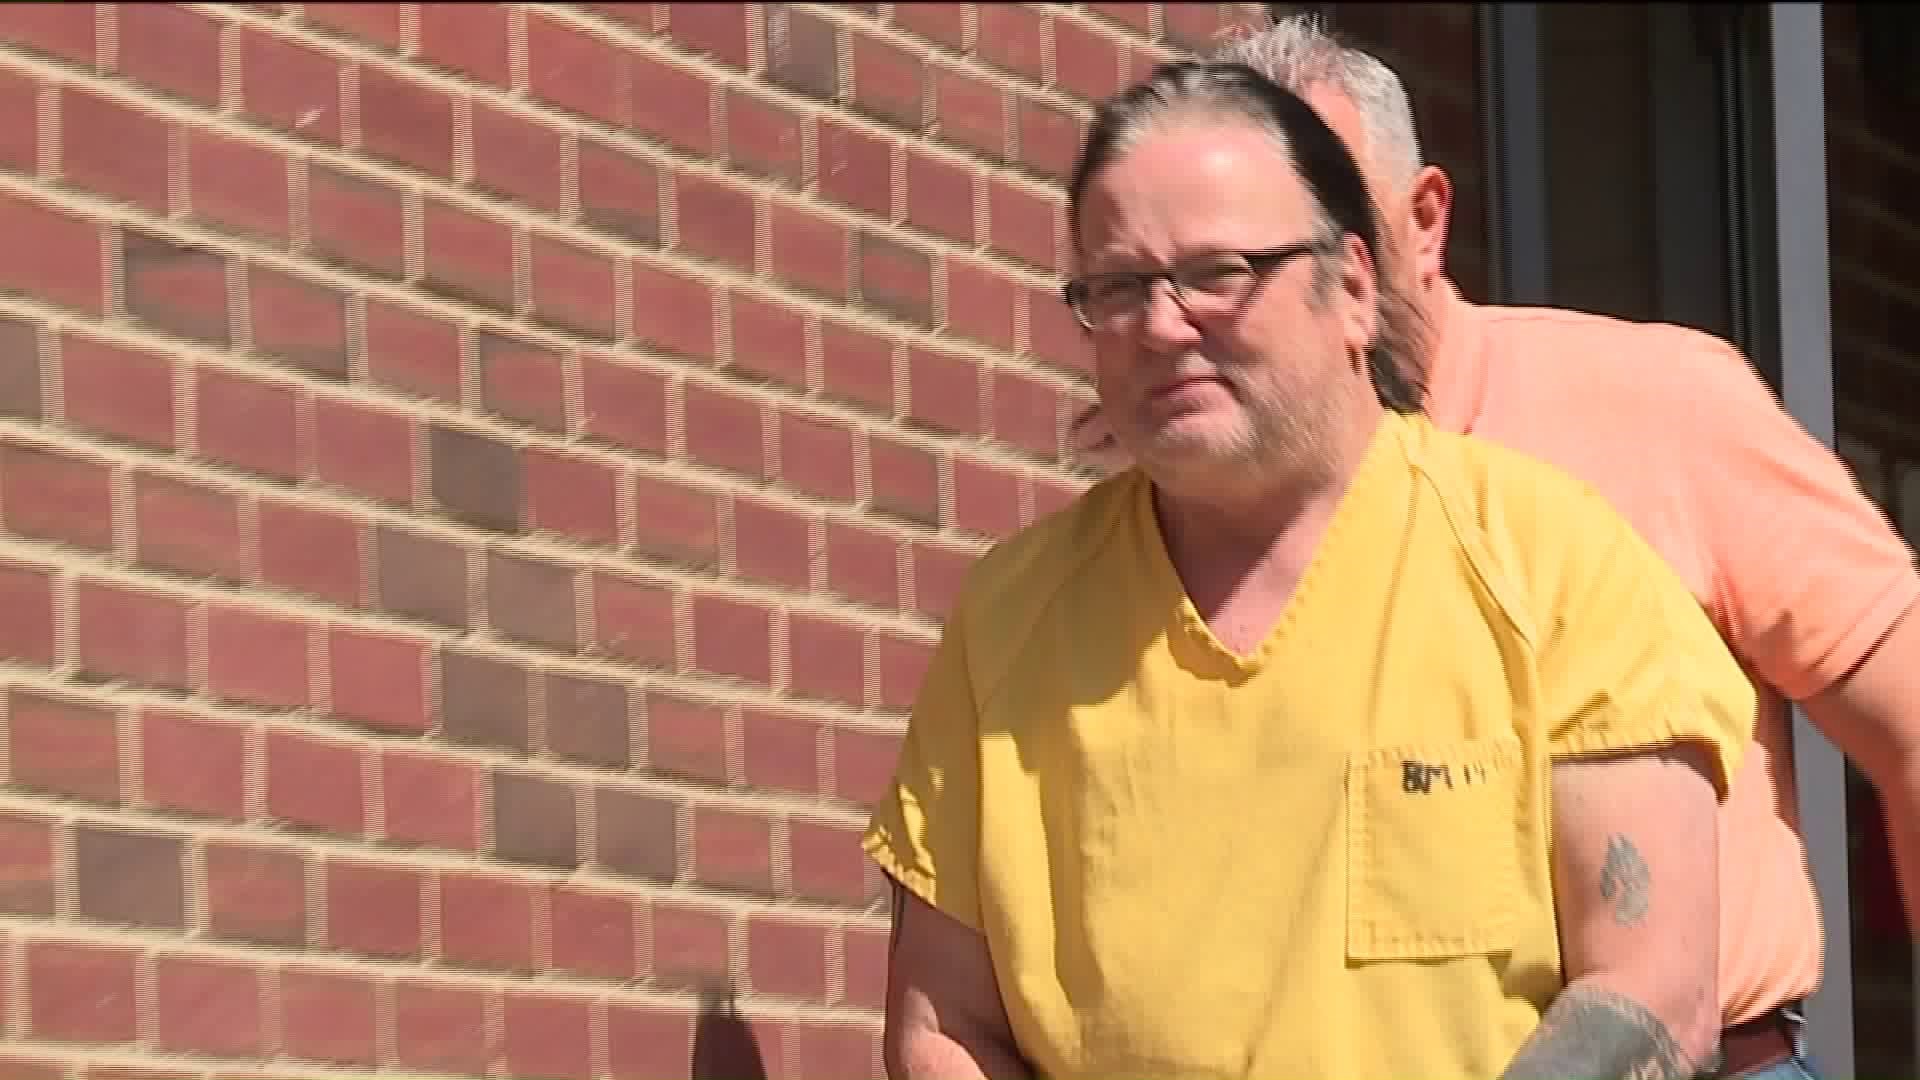 Man Accused of Performing Sex Acts on Underage Boy